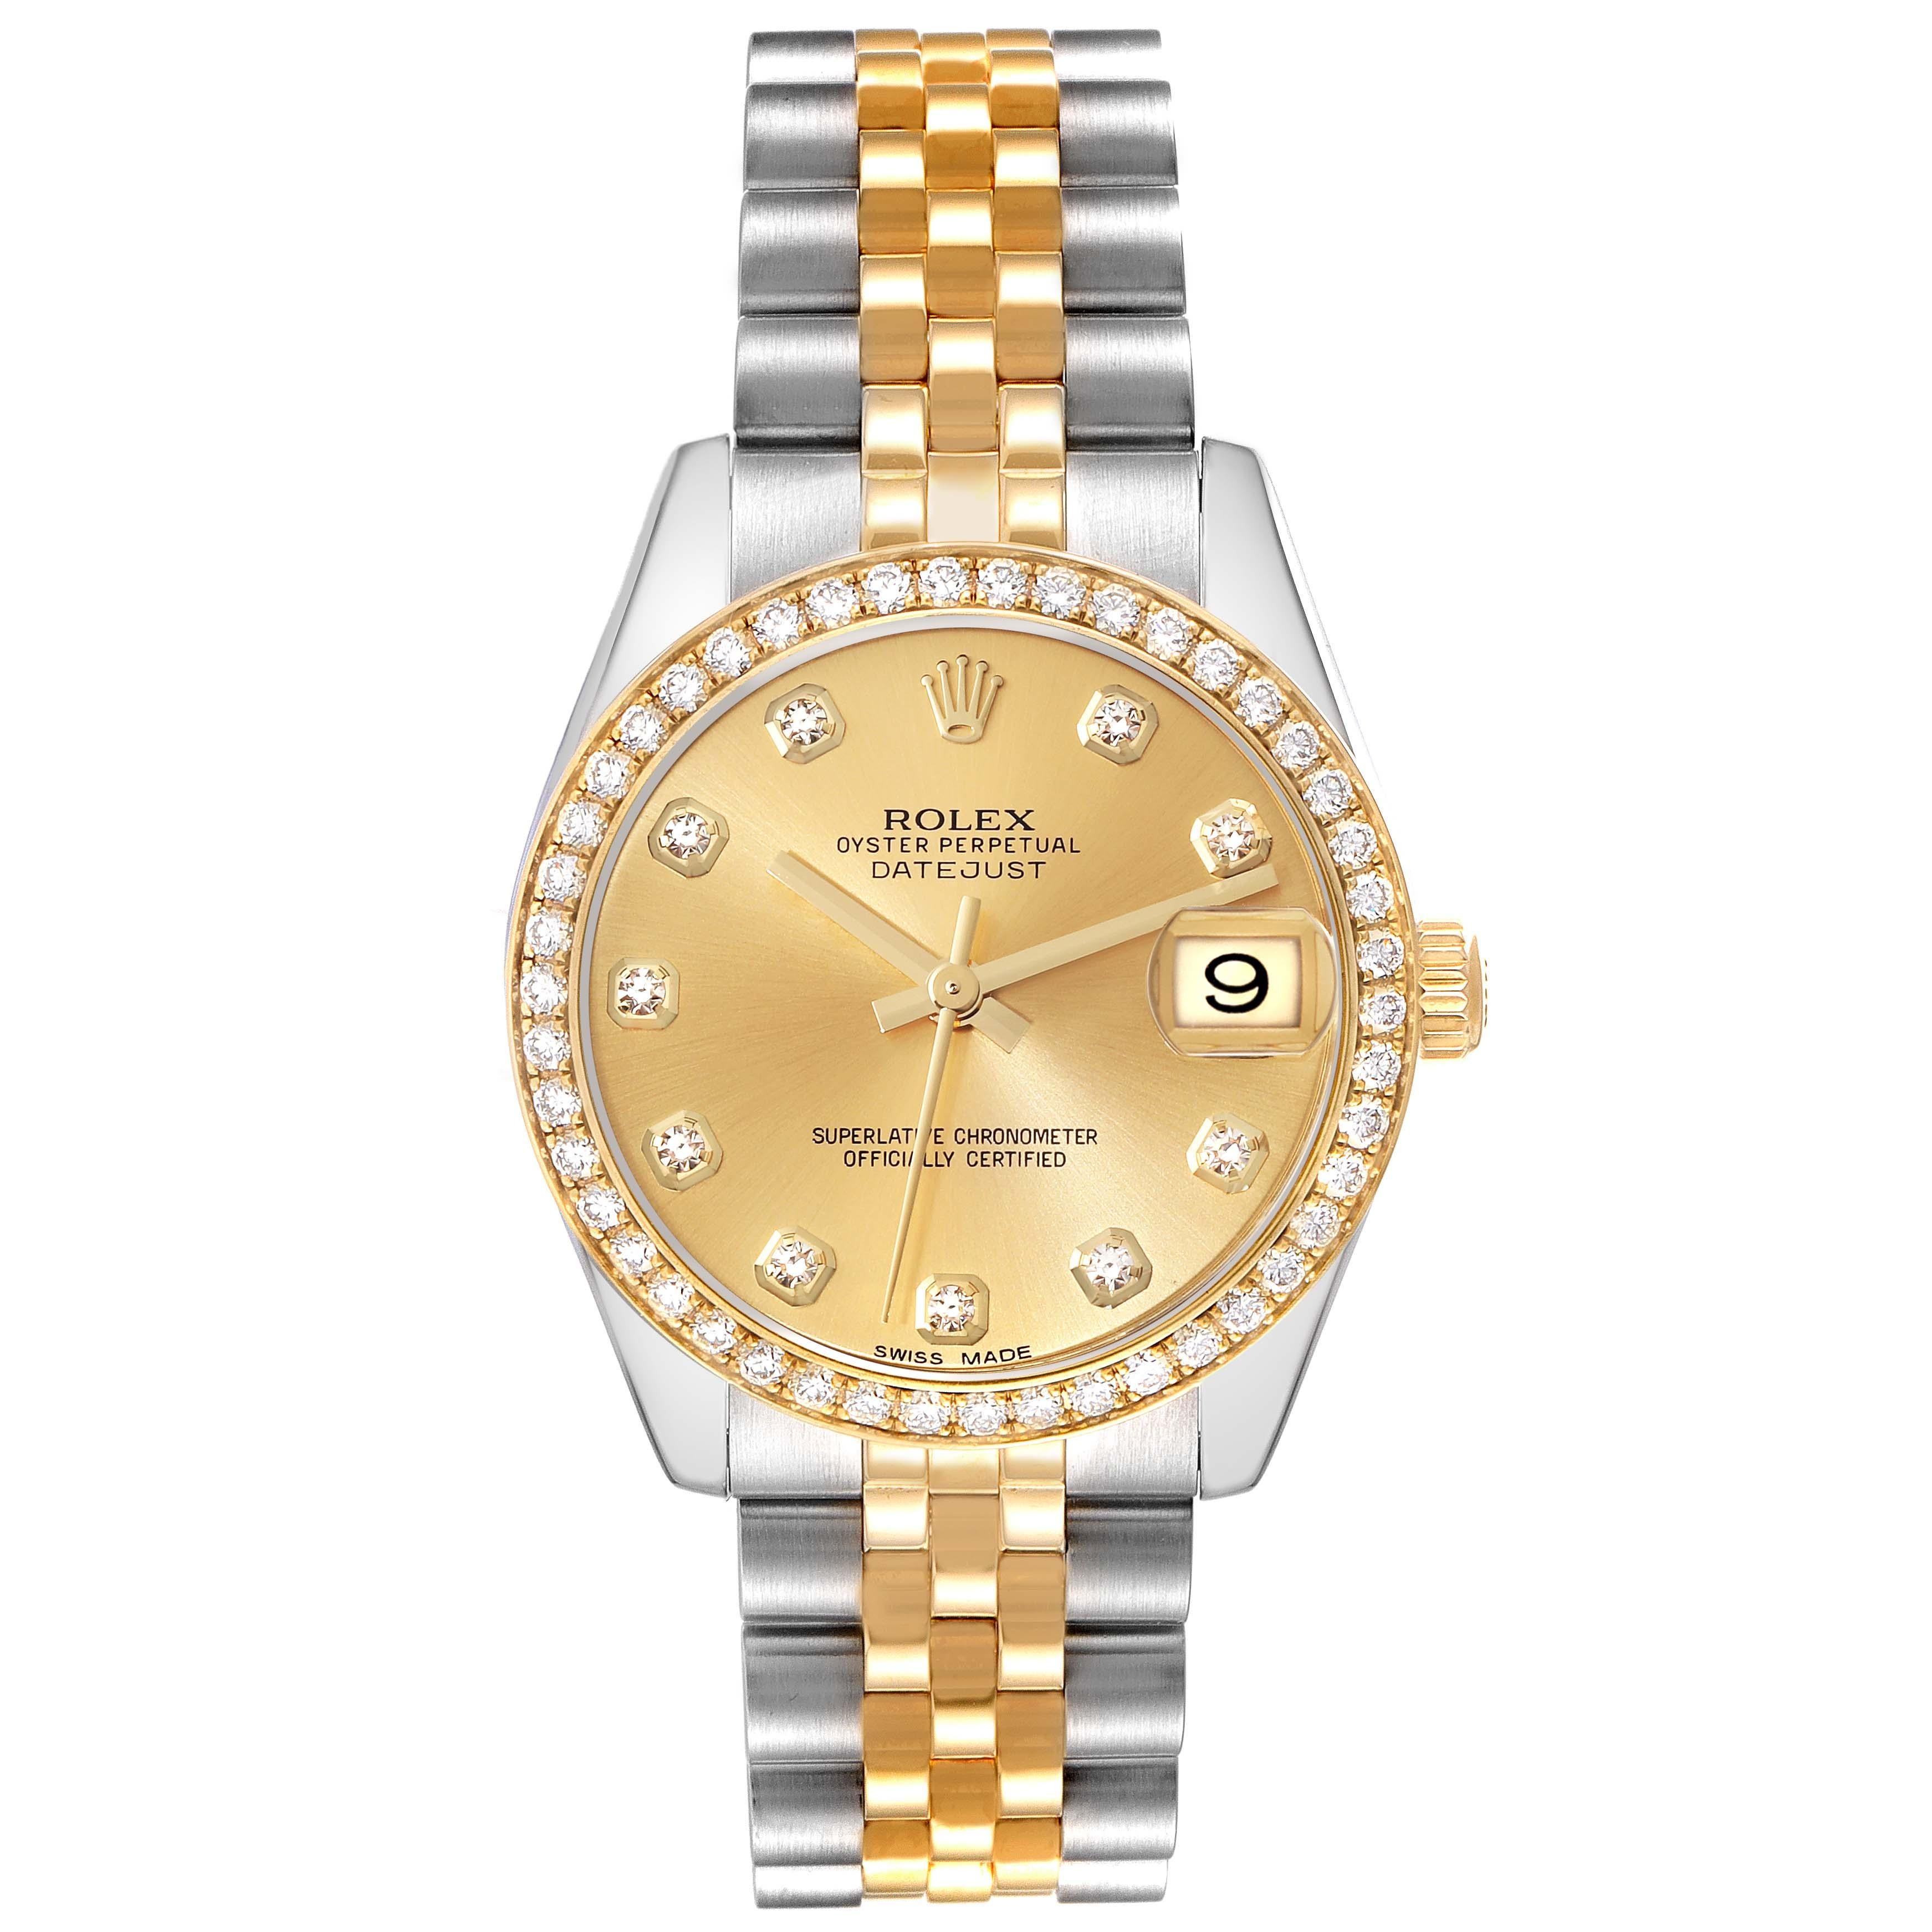 Rolex Datejust 31 Steel Yellow Gold Diamond Ladies Watch 178383 Box Card. Officially certified chronometer self-winding movement. Stainless steel and 18K yellow gold oyster case 31.0 mm in diameter. Rolex logo on a crown. Original Rolex factory